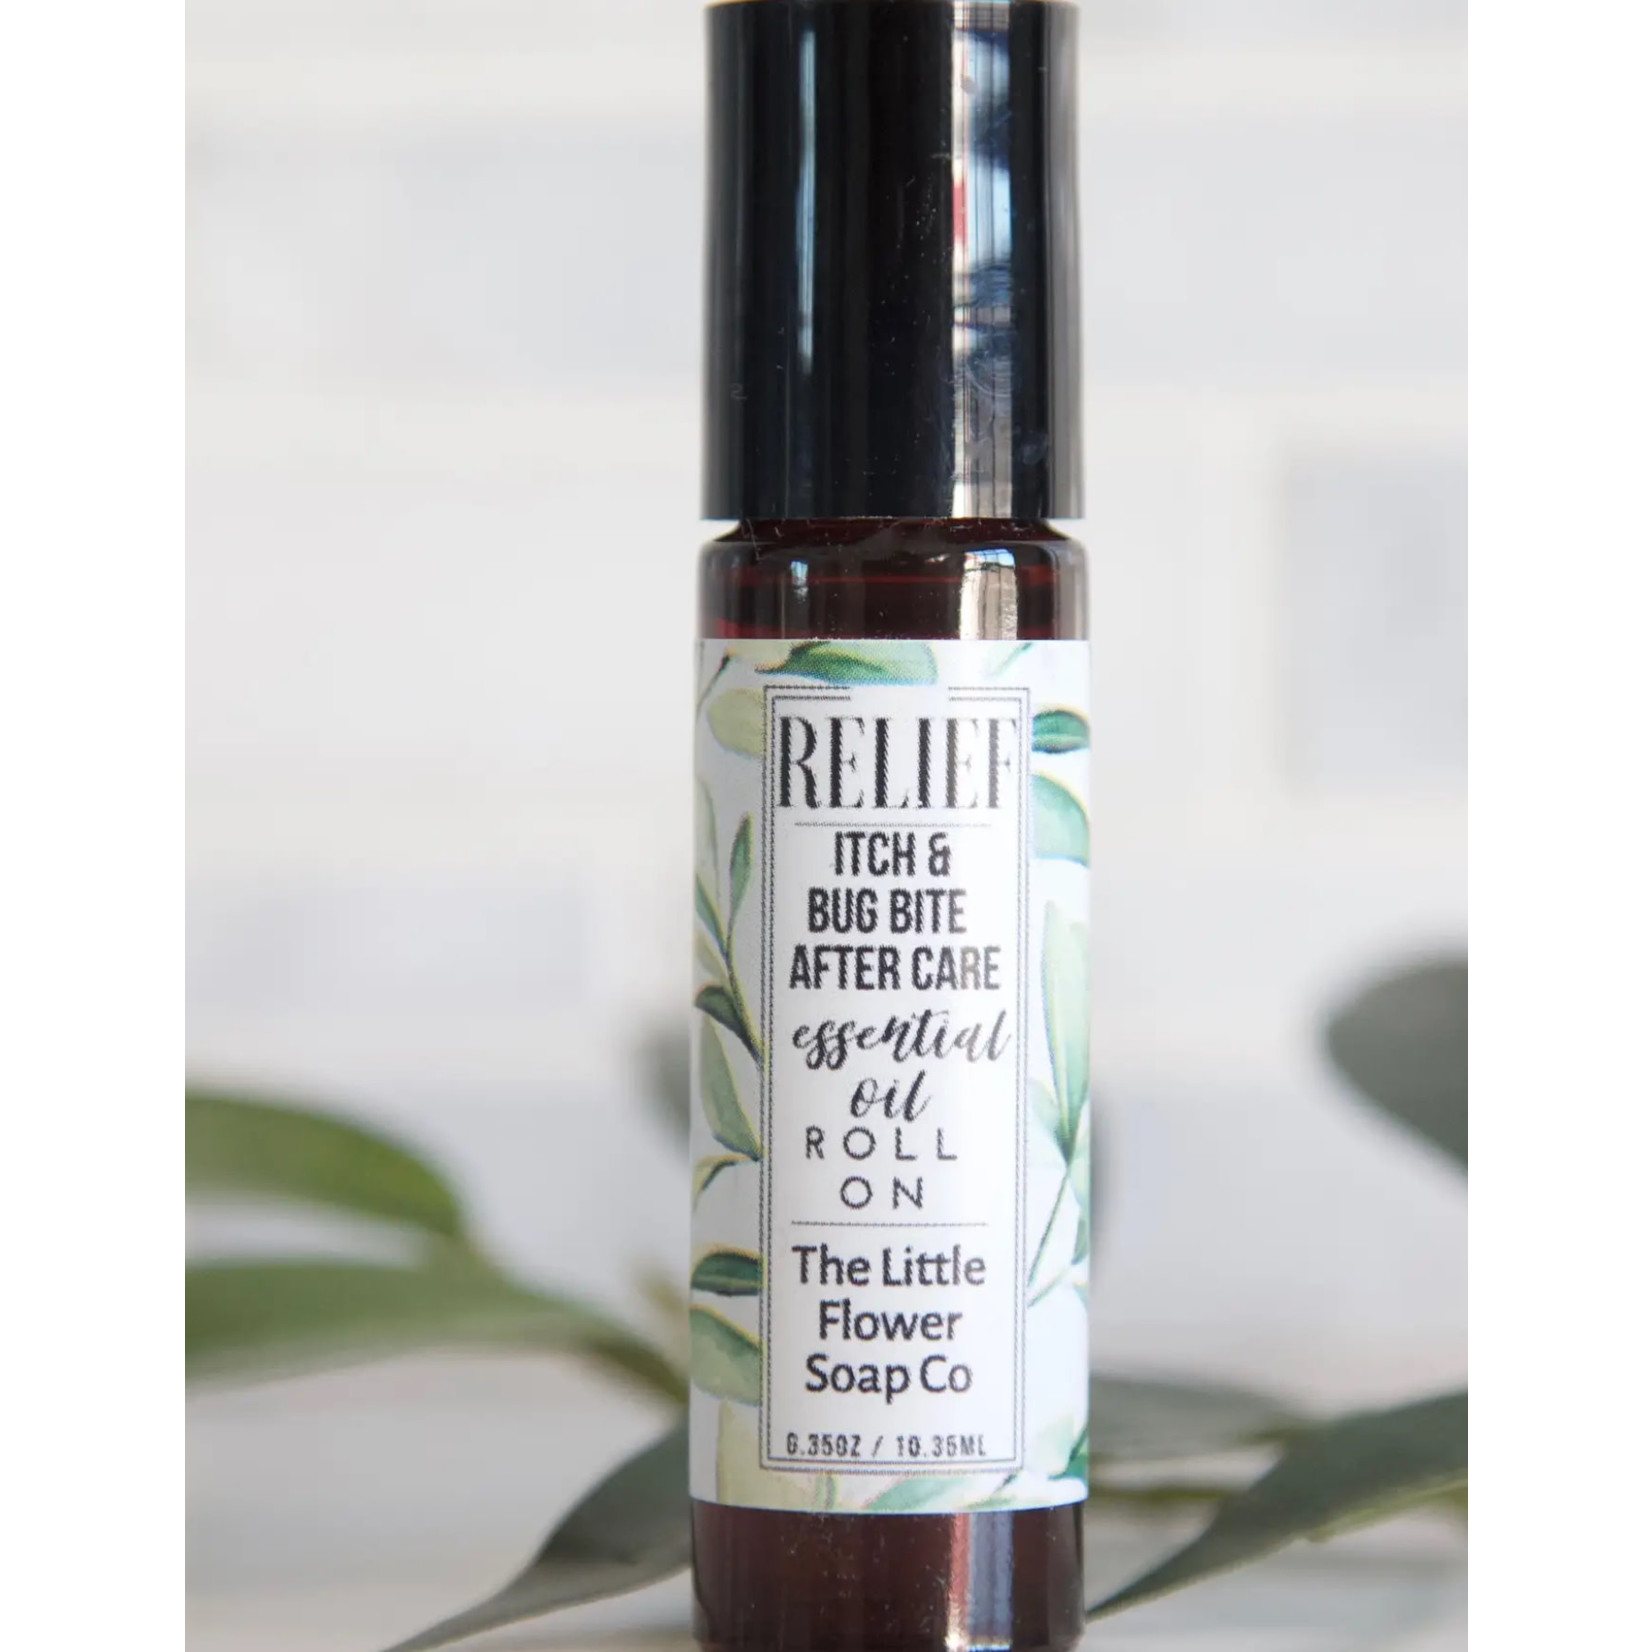 The Little Flower Soap Co Bug Bite Aftercare Essential Oil Roll-on Aromatherapy